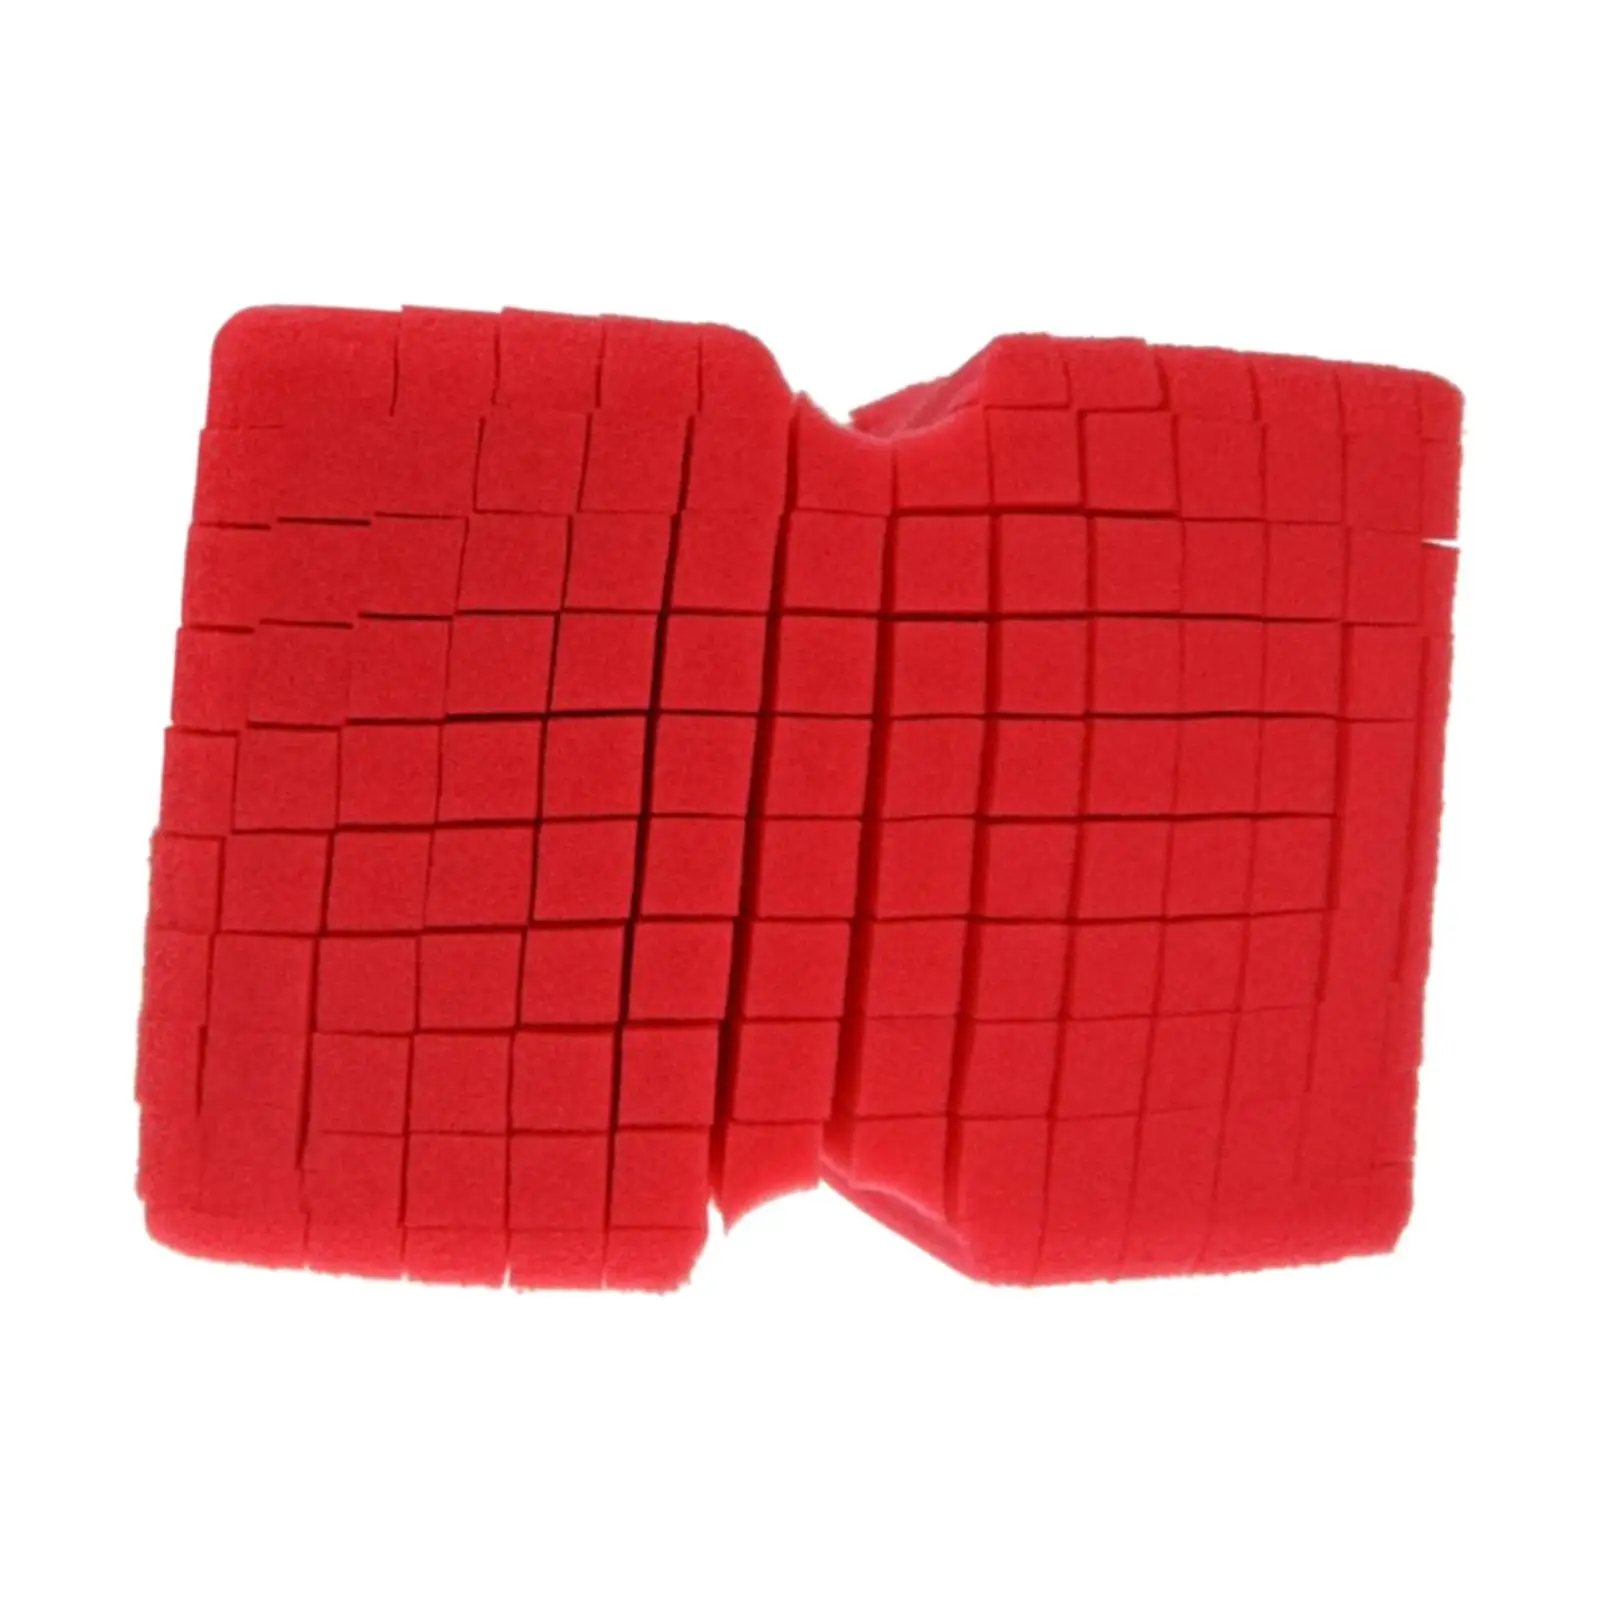 Pva Sponge, Car Household Cleaning Sponge,  Water Absorbing Car Cleaning Accessories for Trucks Bathtub, Water Games, Furniture